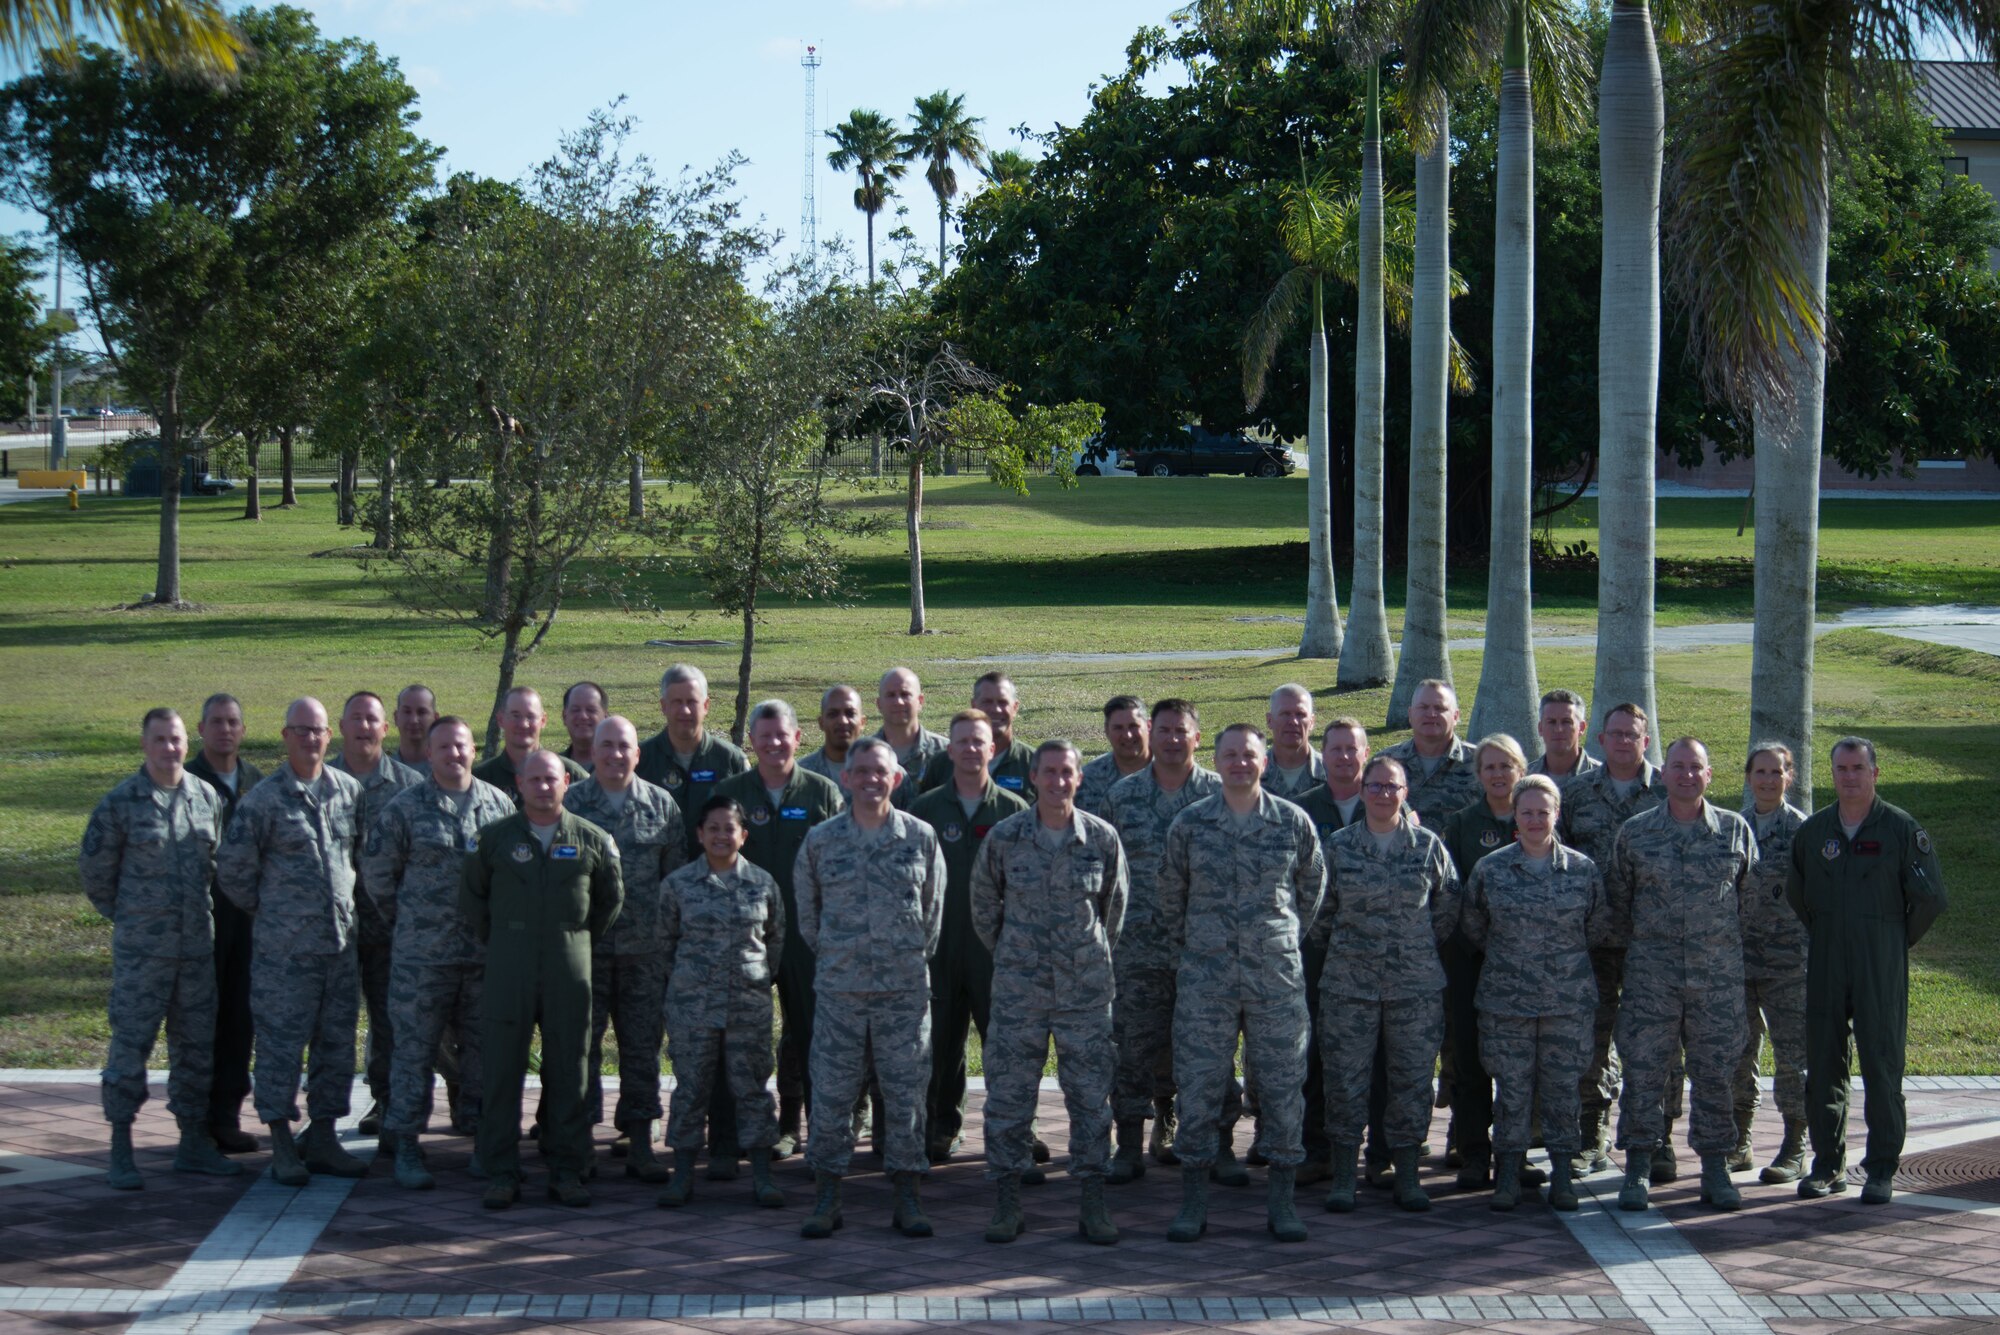 During the week of February 5-9, commanders and command chief master sgts. from across 10th Air Force traveled to Homestead Air Reserve Base, Florida, for the annual 10th Air Force Commanders and Command Chiefs Conference. This year the conference heard briefings on leadership, multi-domain command and control, budget and many other topics. They also discussed Tenth Air Force priorities, annual awards packages and operations plans.